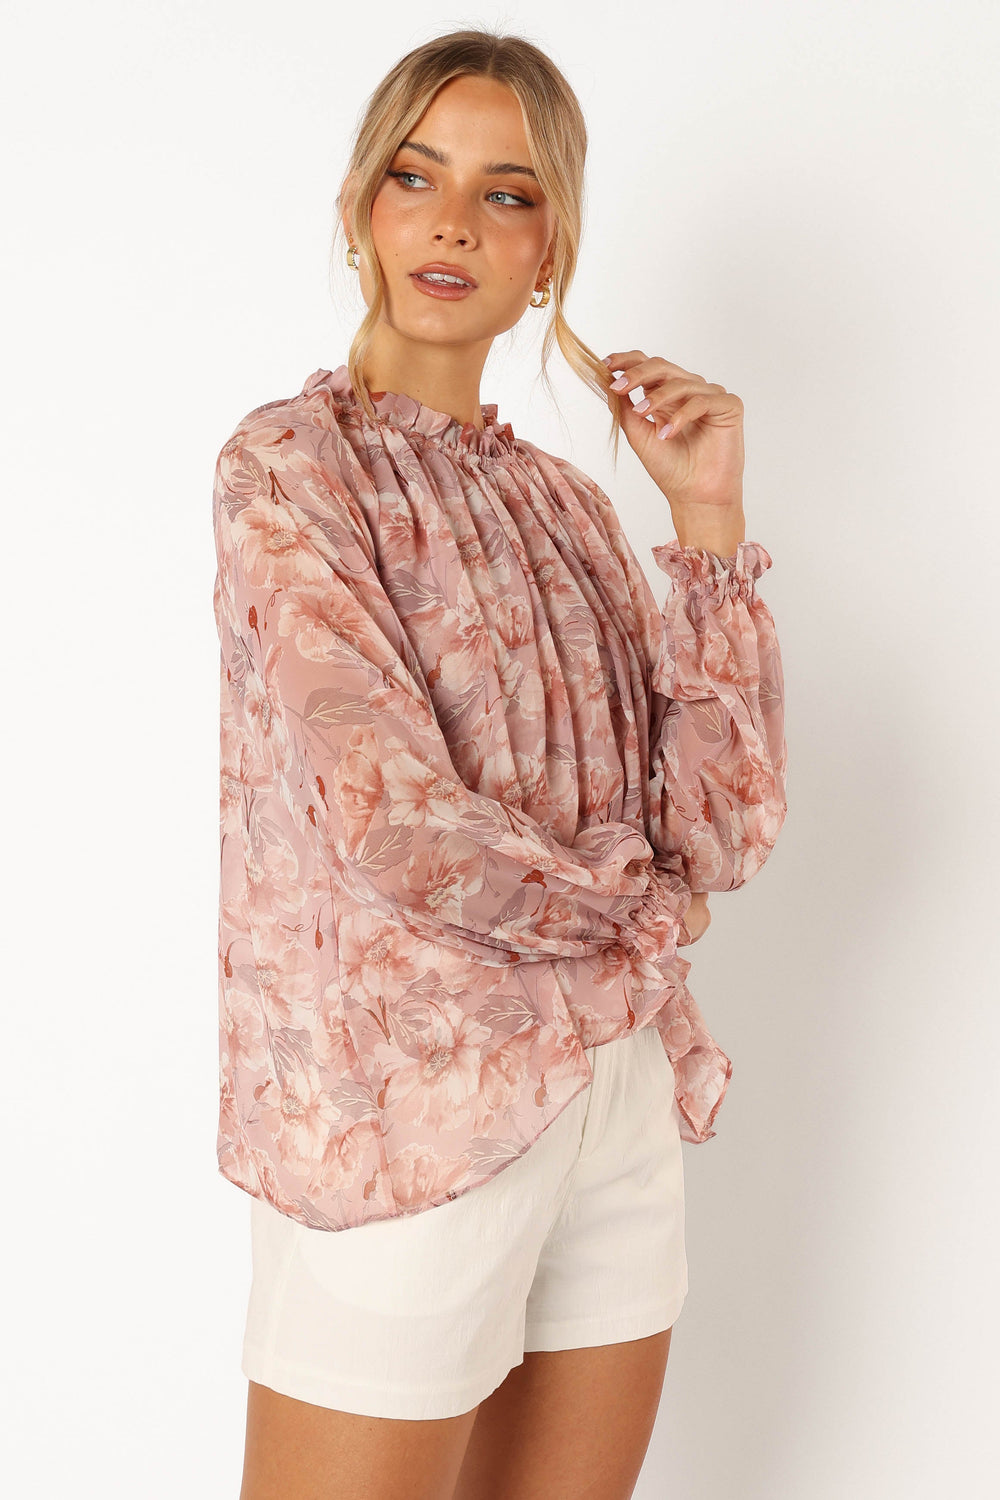 TOPS @Foster Blouse - Floral